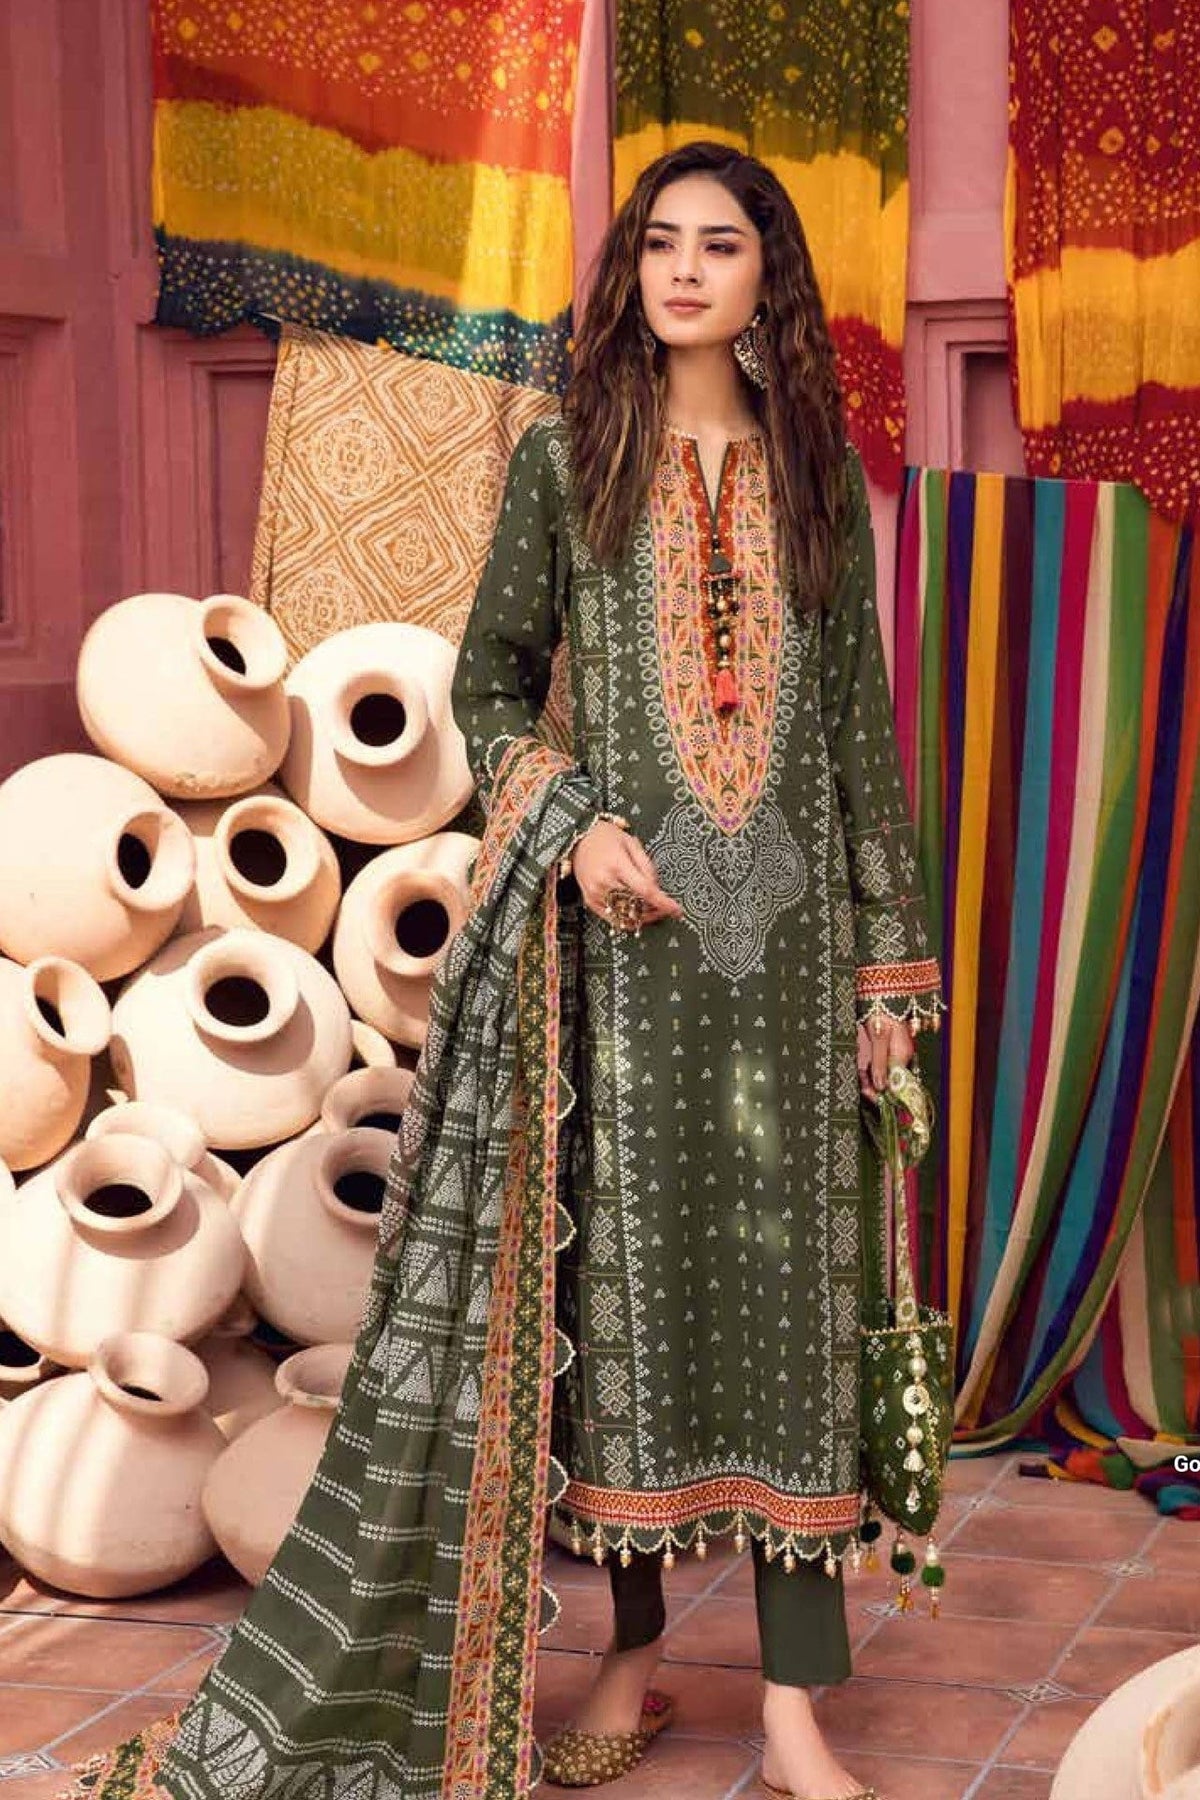 3PC Chunri Lawn Unstitched Gold Printed Suit